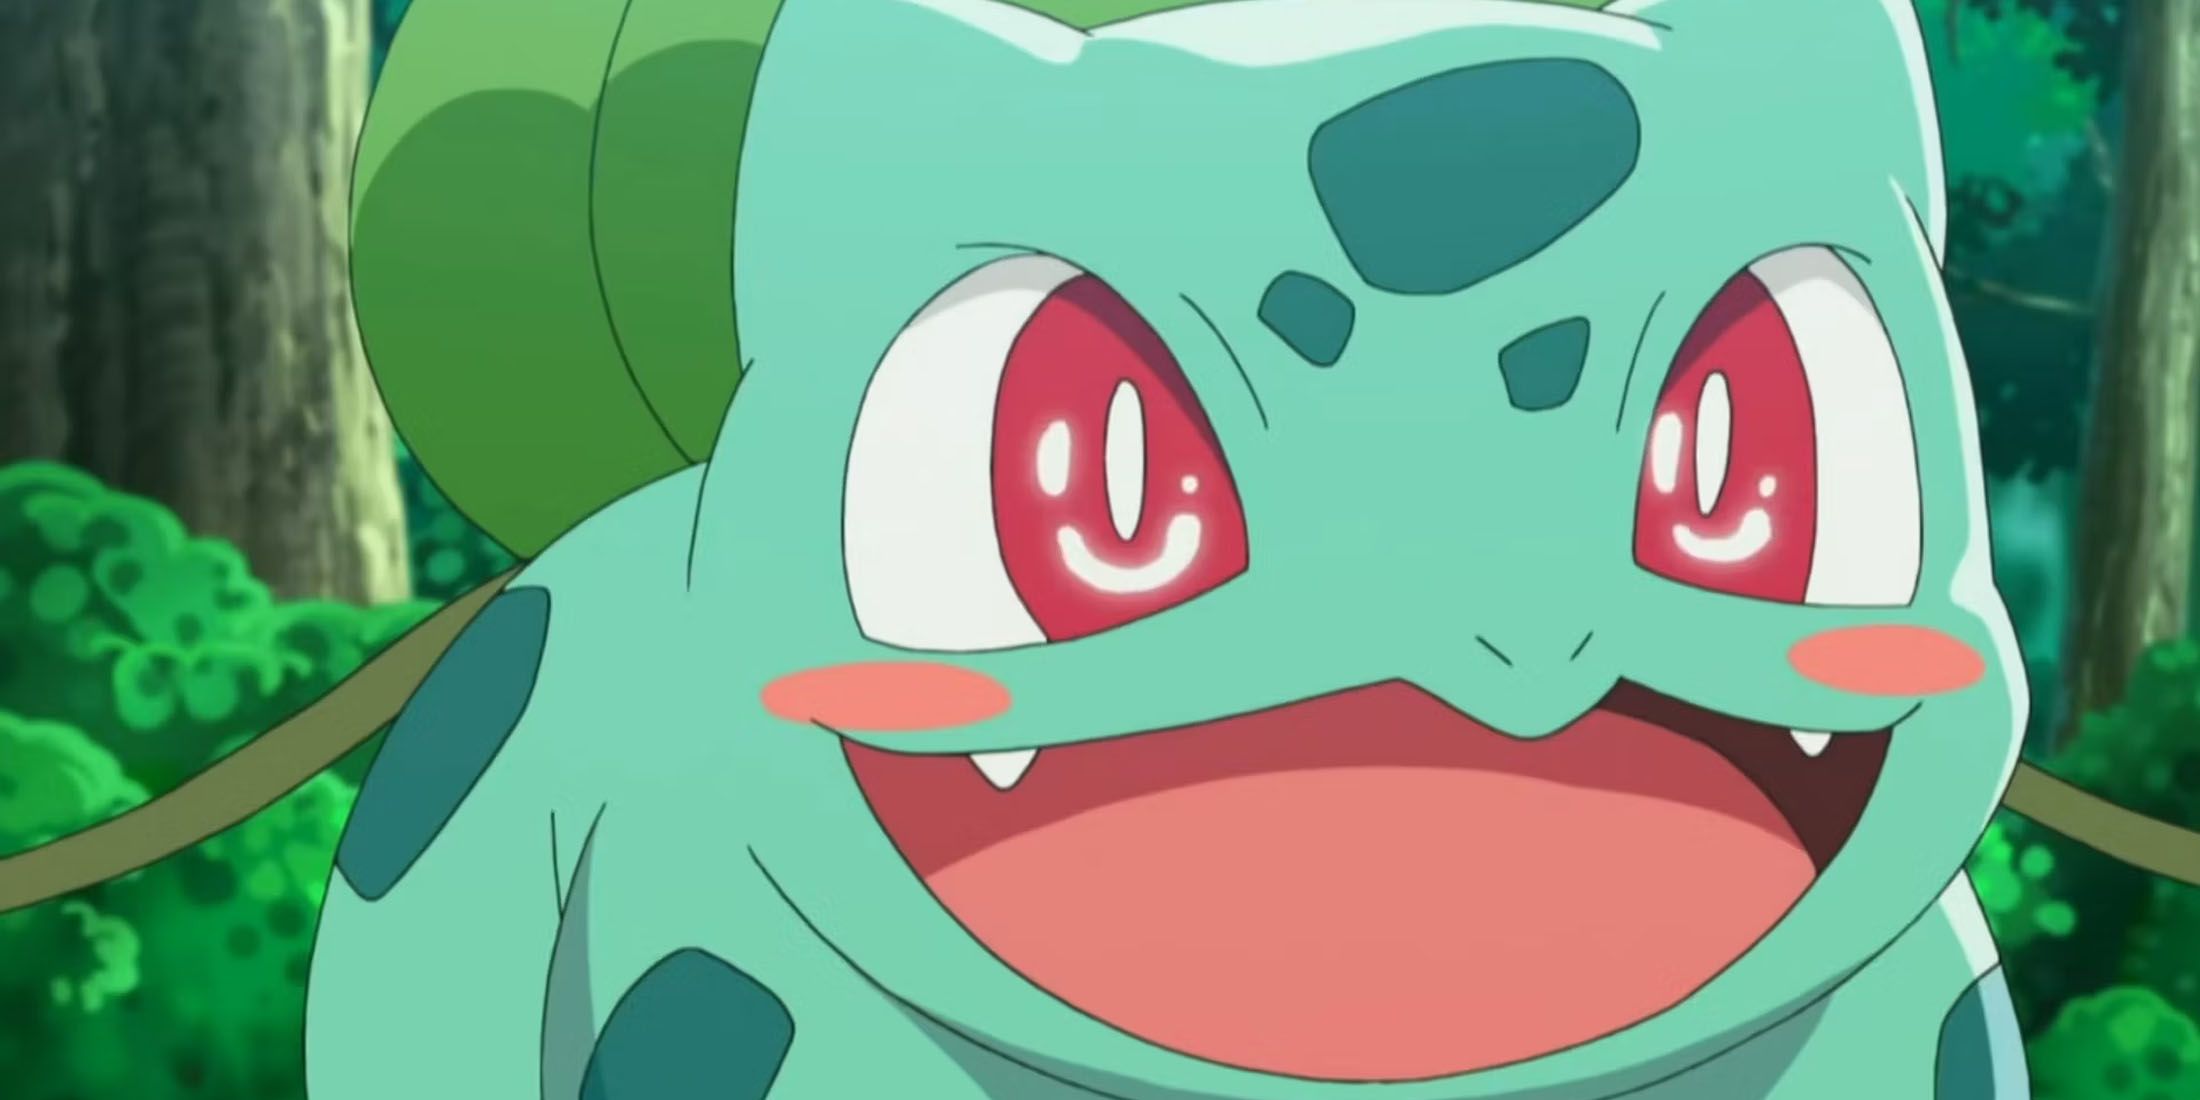 A screenshot of Bulbasaur with a dazzled expression in the Pokemon anime.